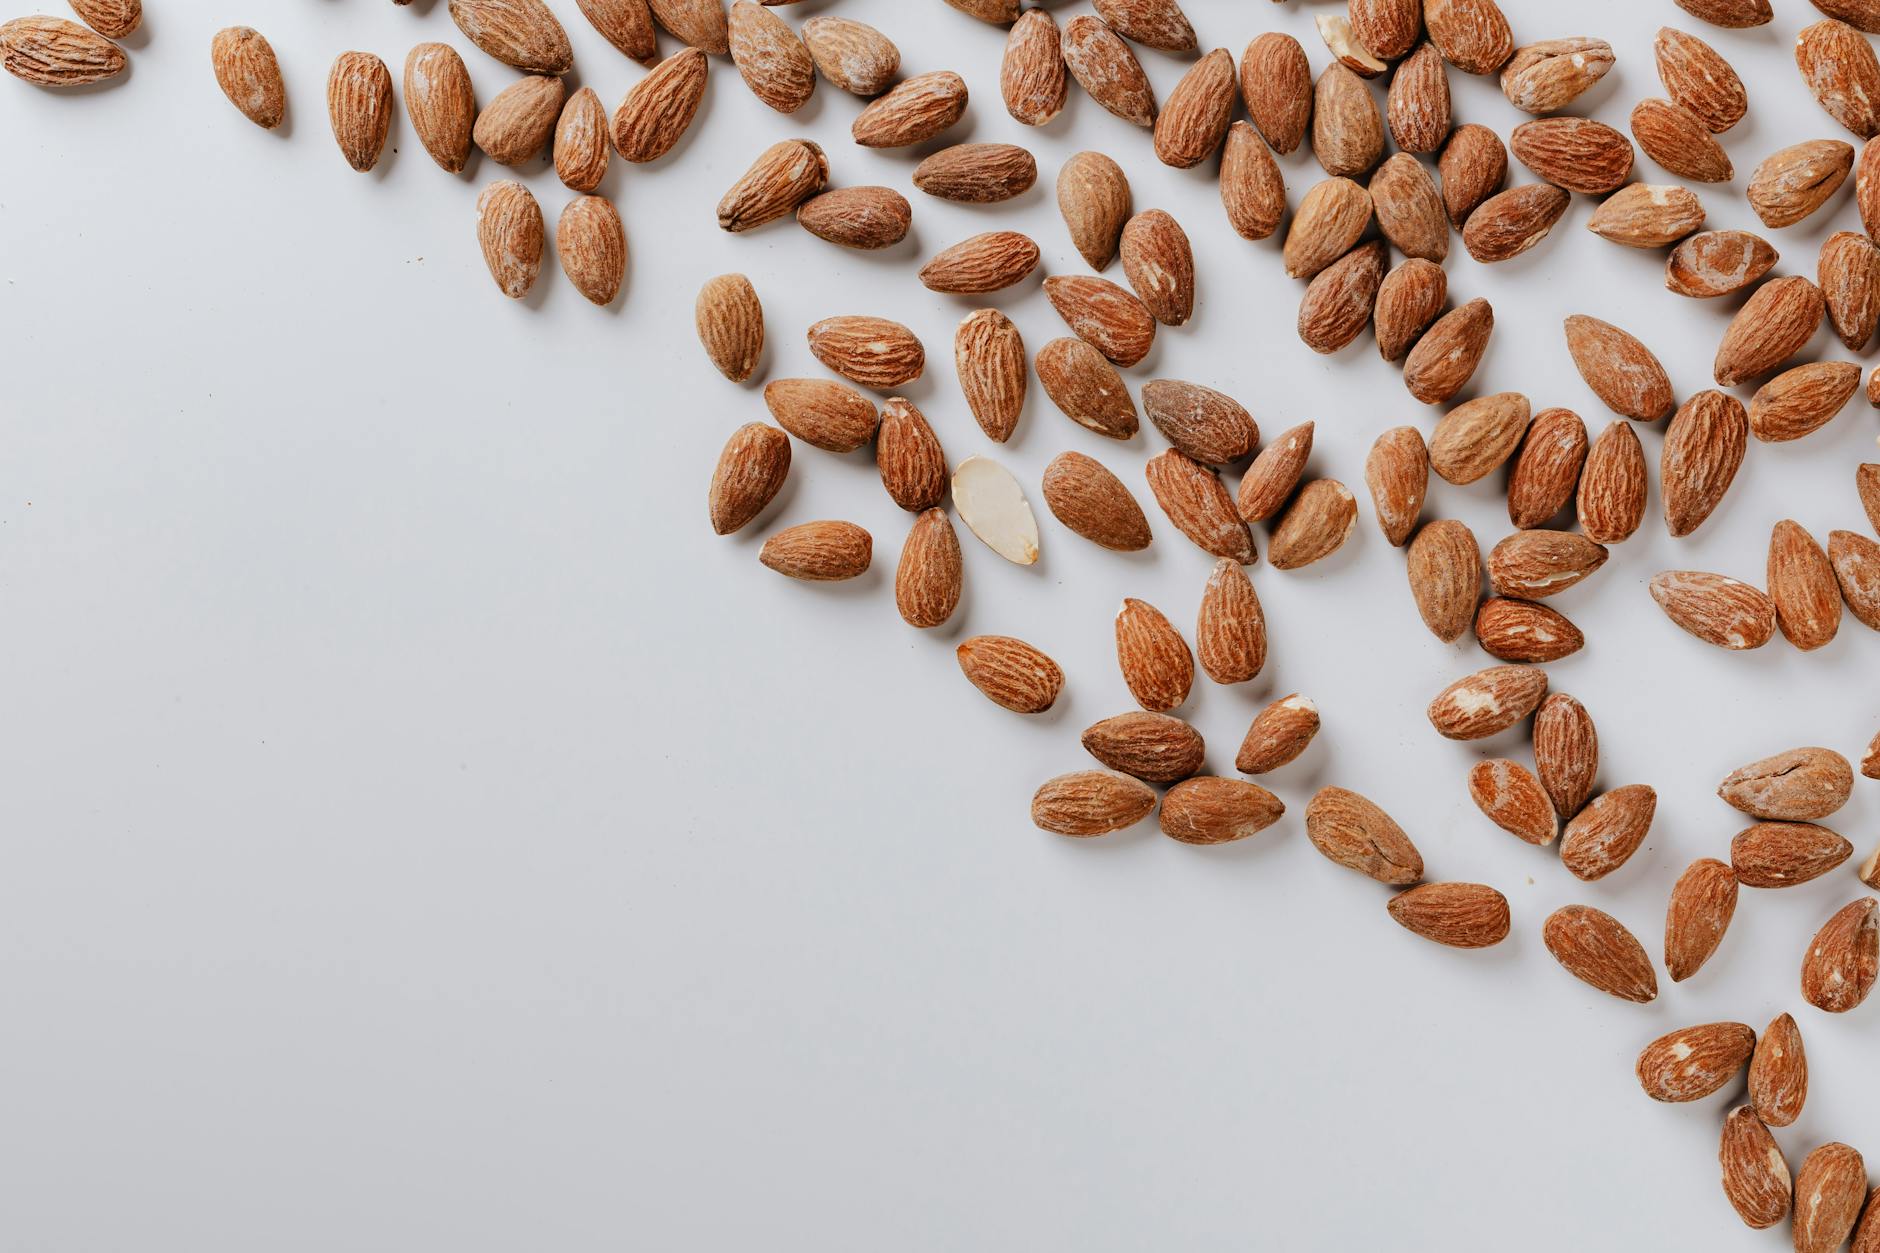 Top view of almonds illustrating healthy food eating concept